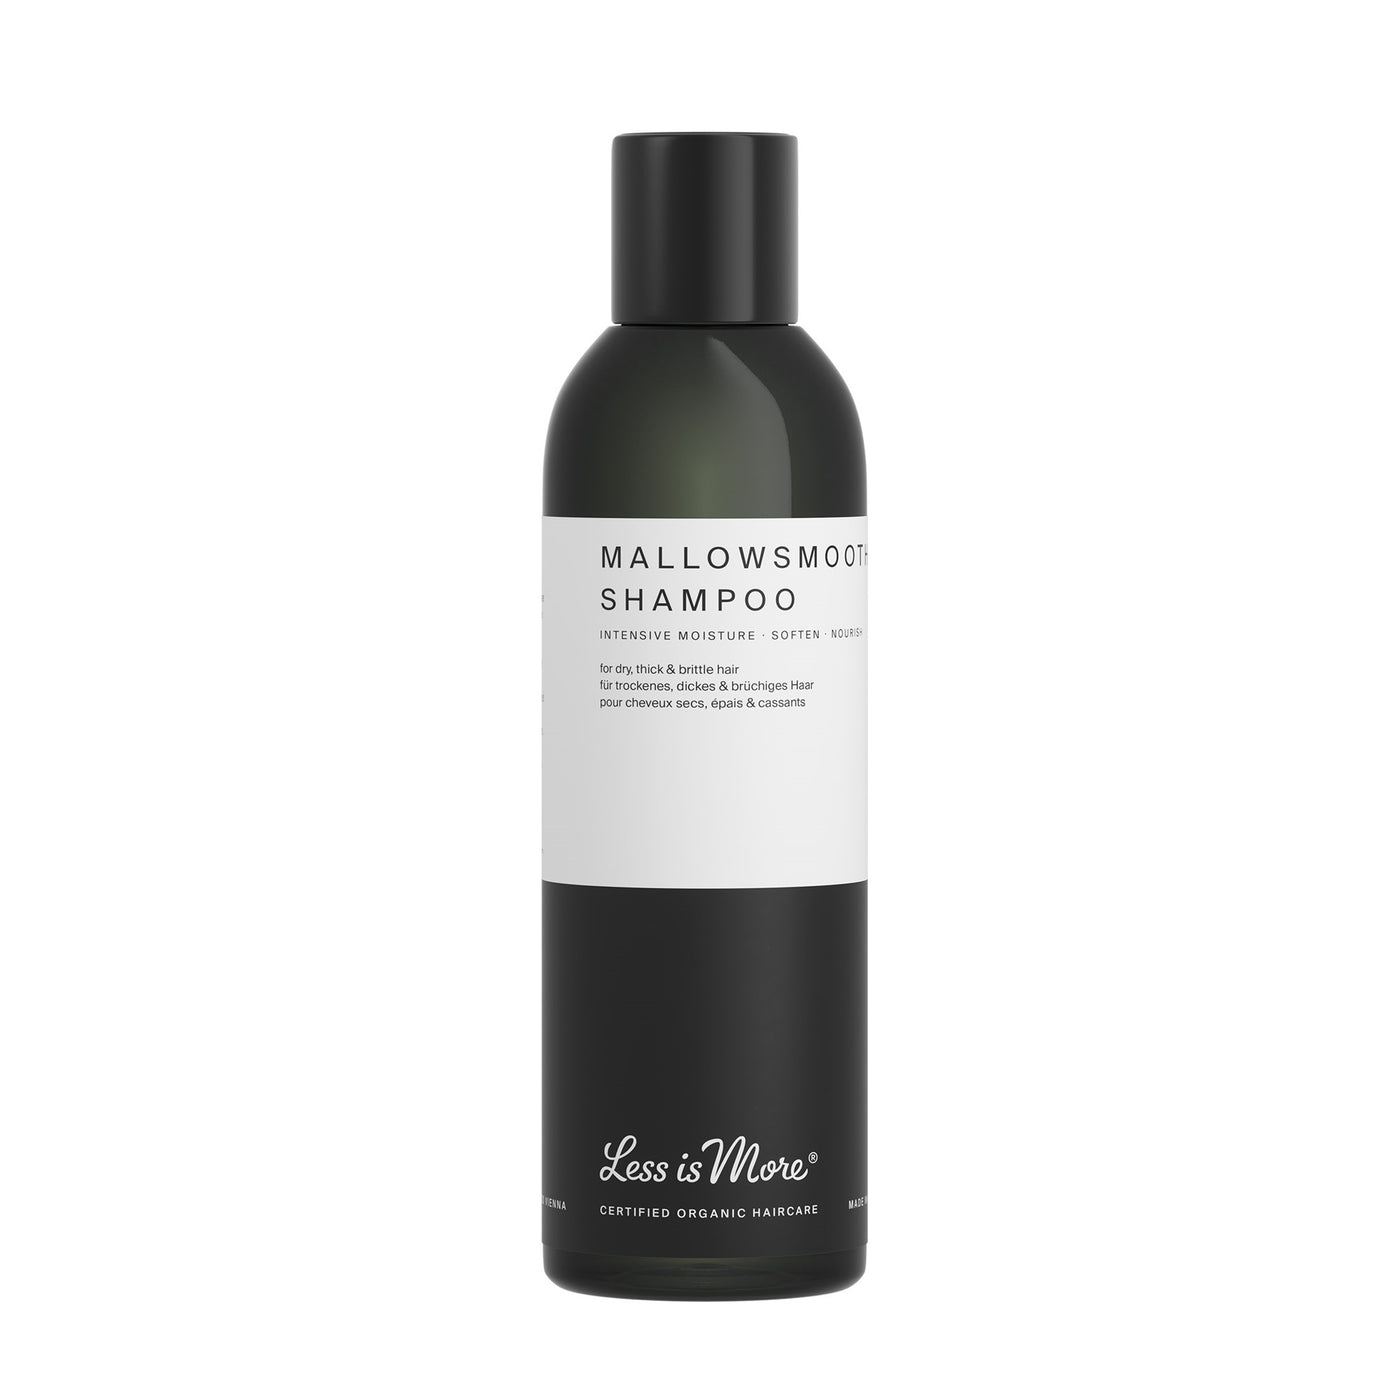 Less is More Mallowsmooth Shampoo